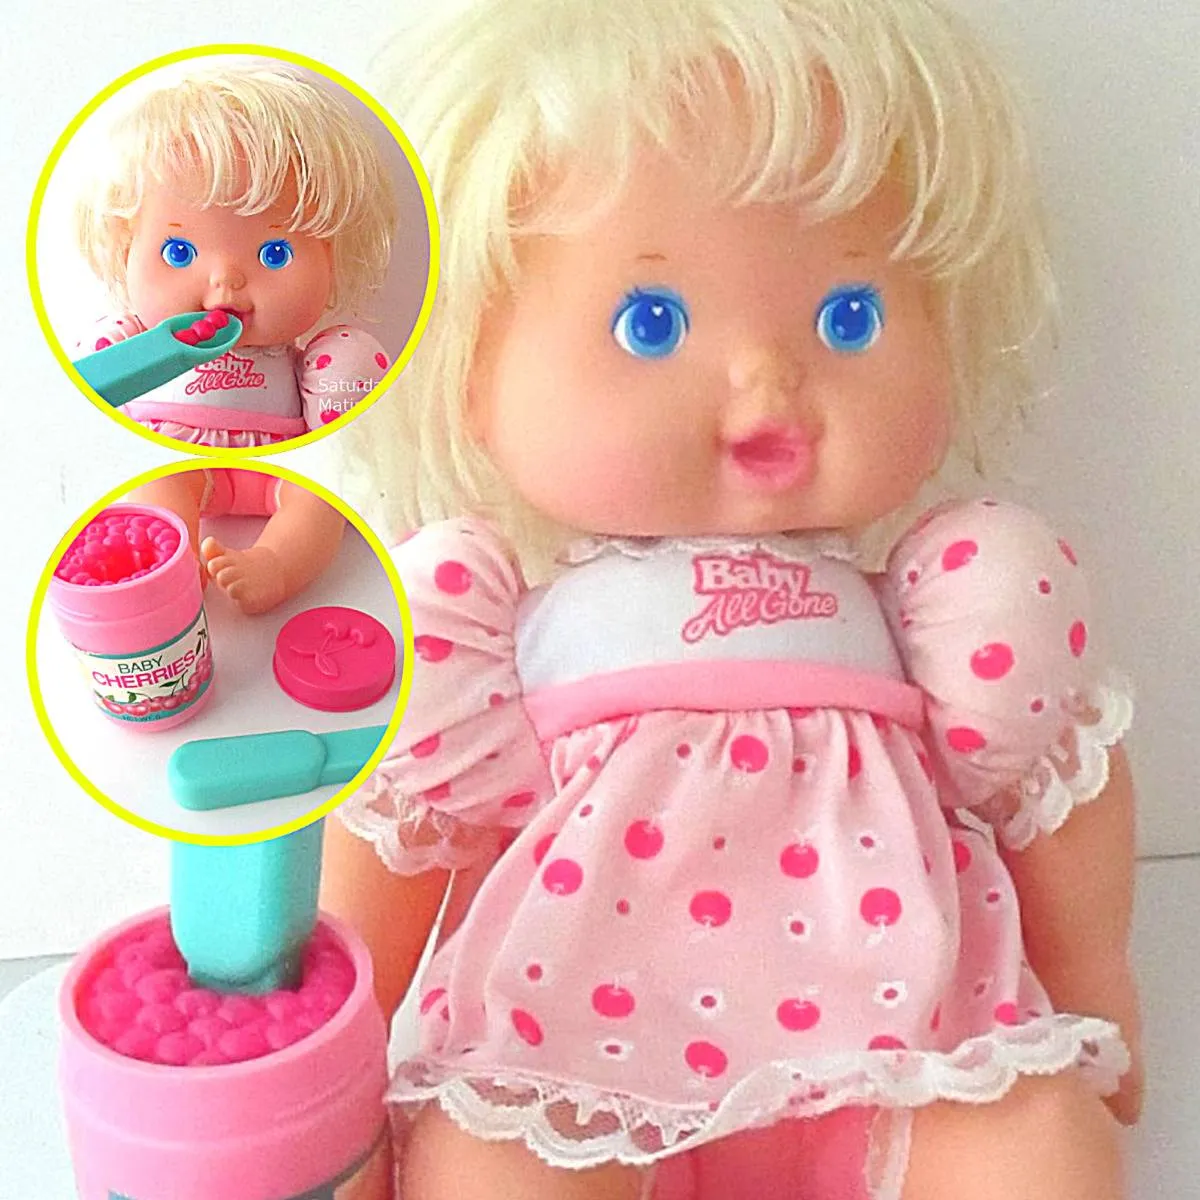 doll dressed in a pink outfit getting fed 